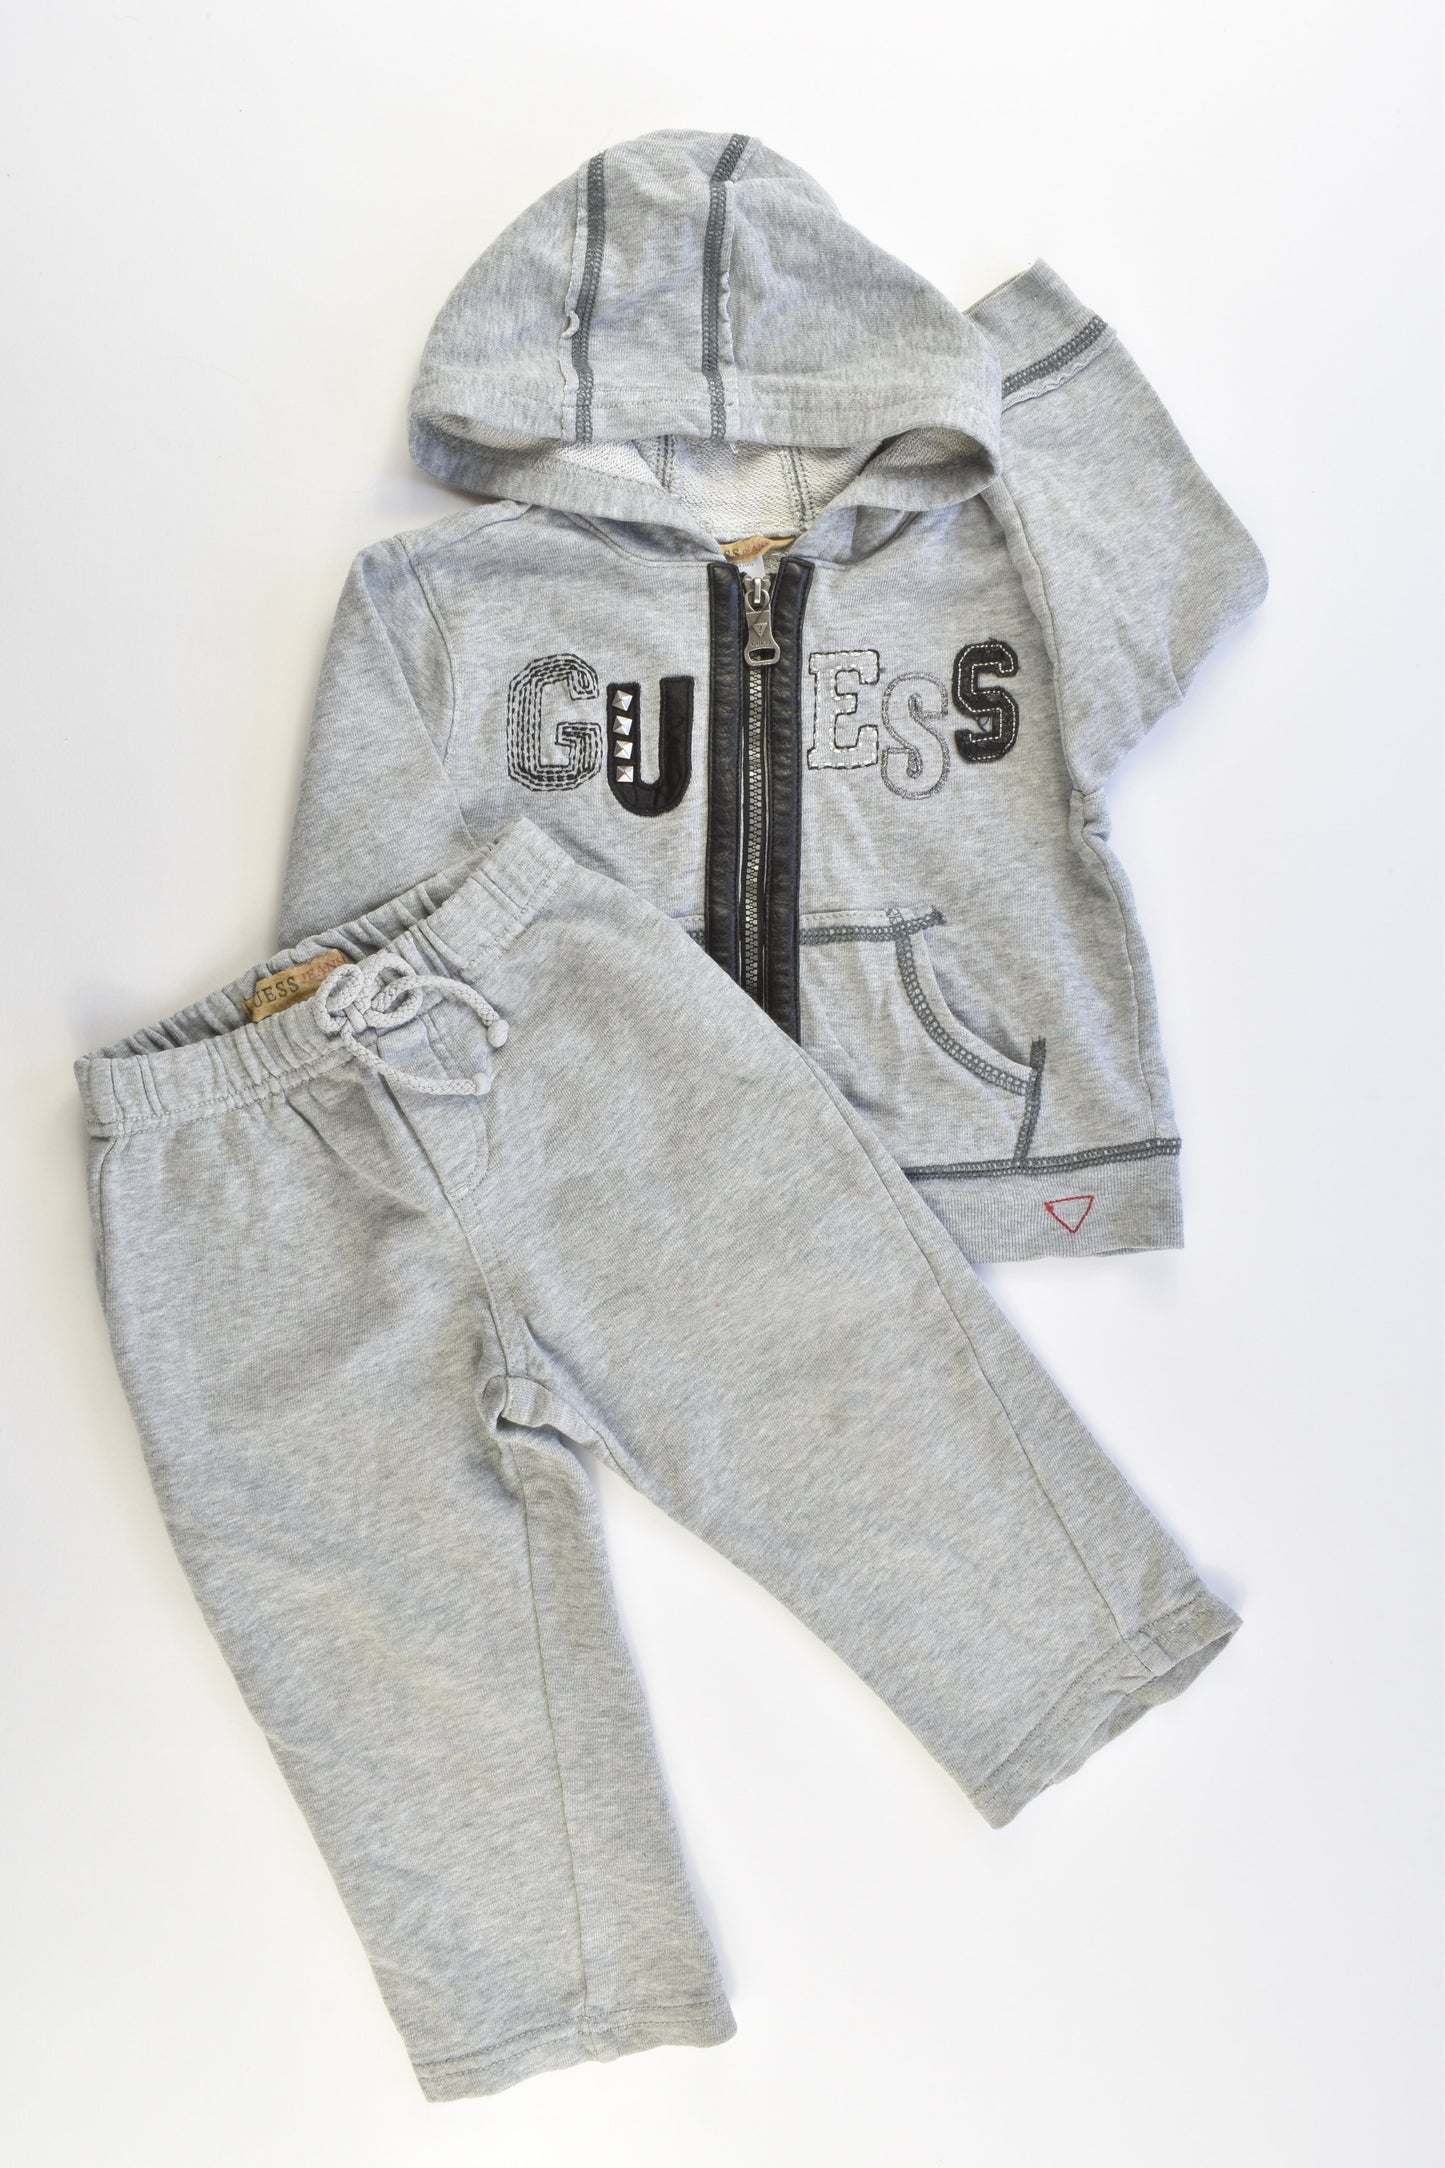 Guess Size 1-2 (18 months) Hooded Jumper and Trackpants